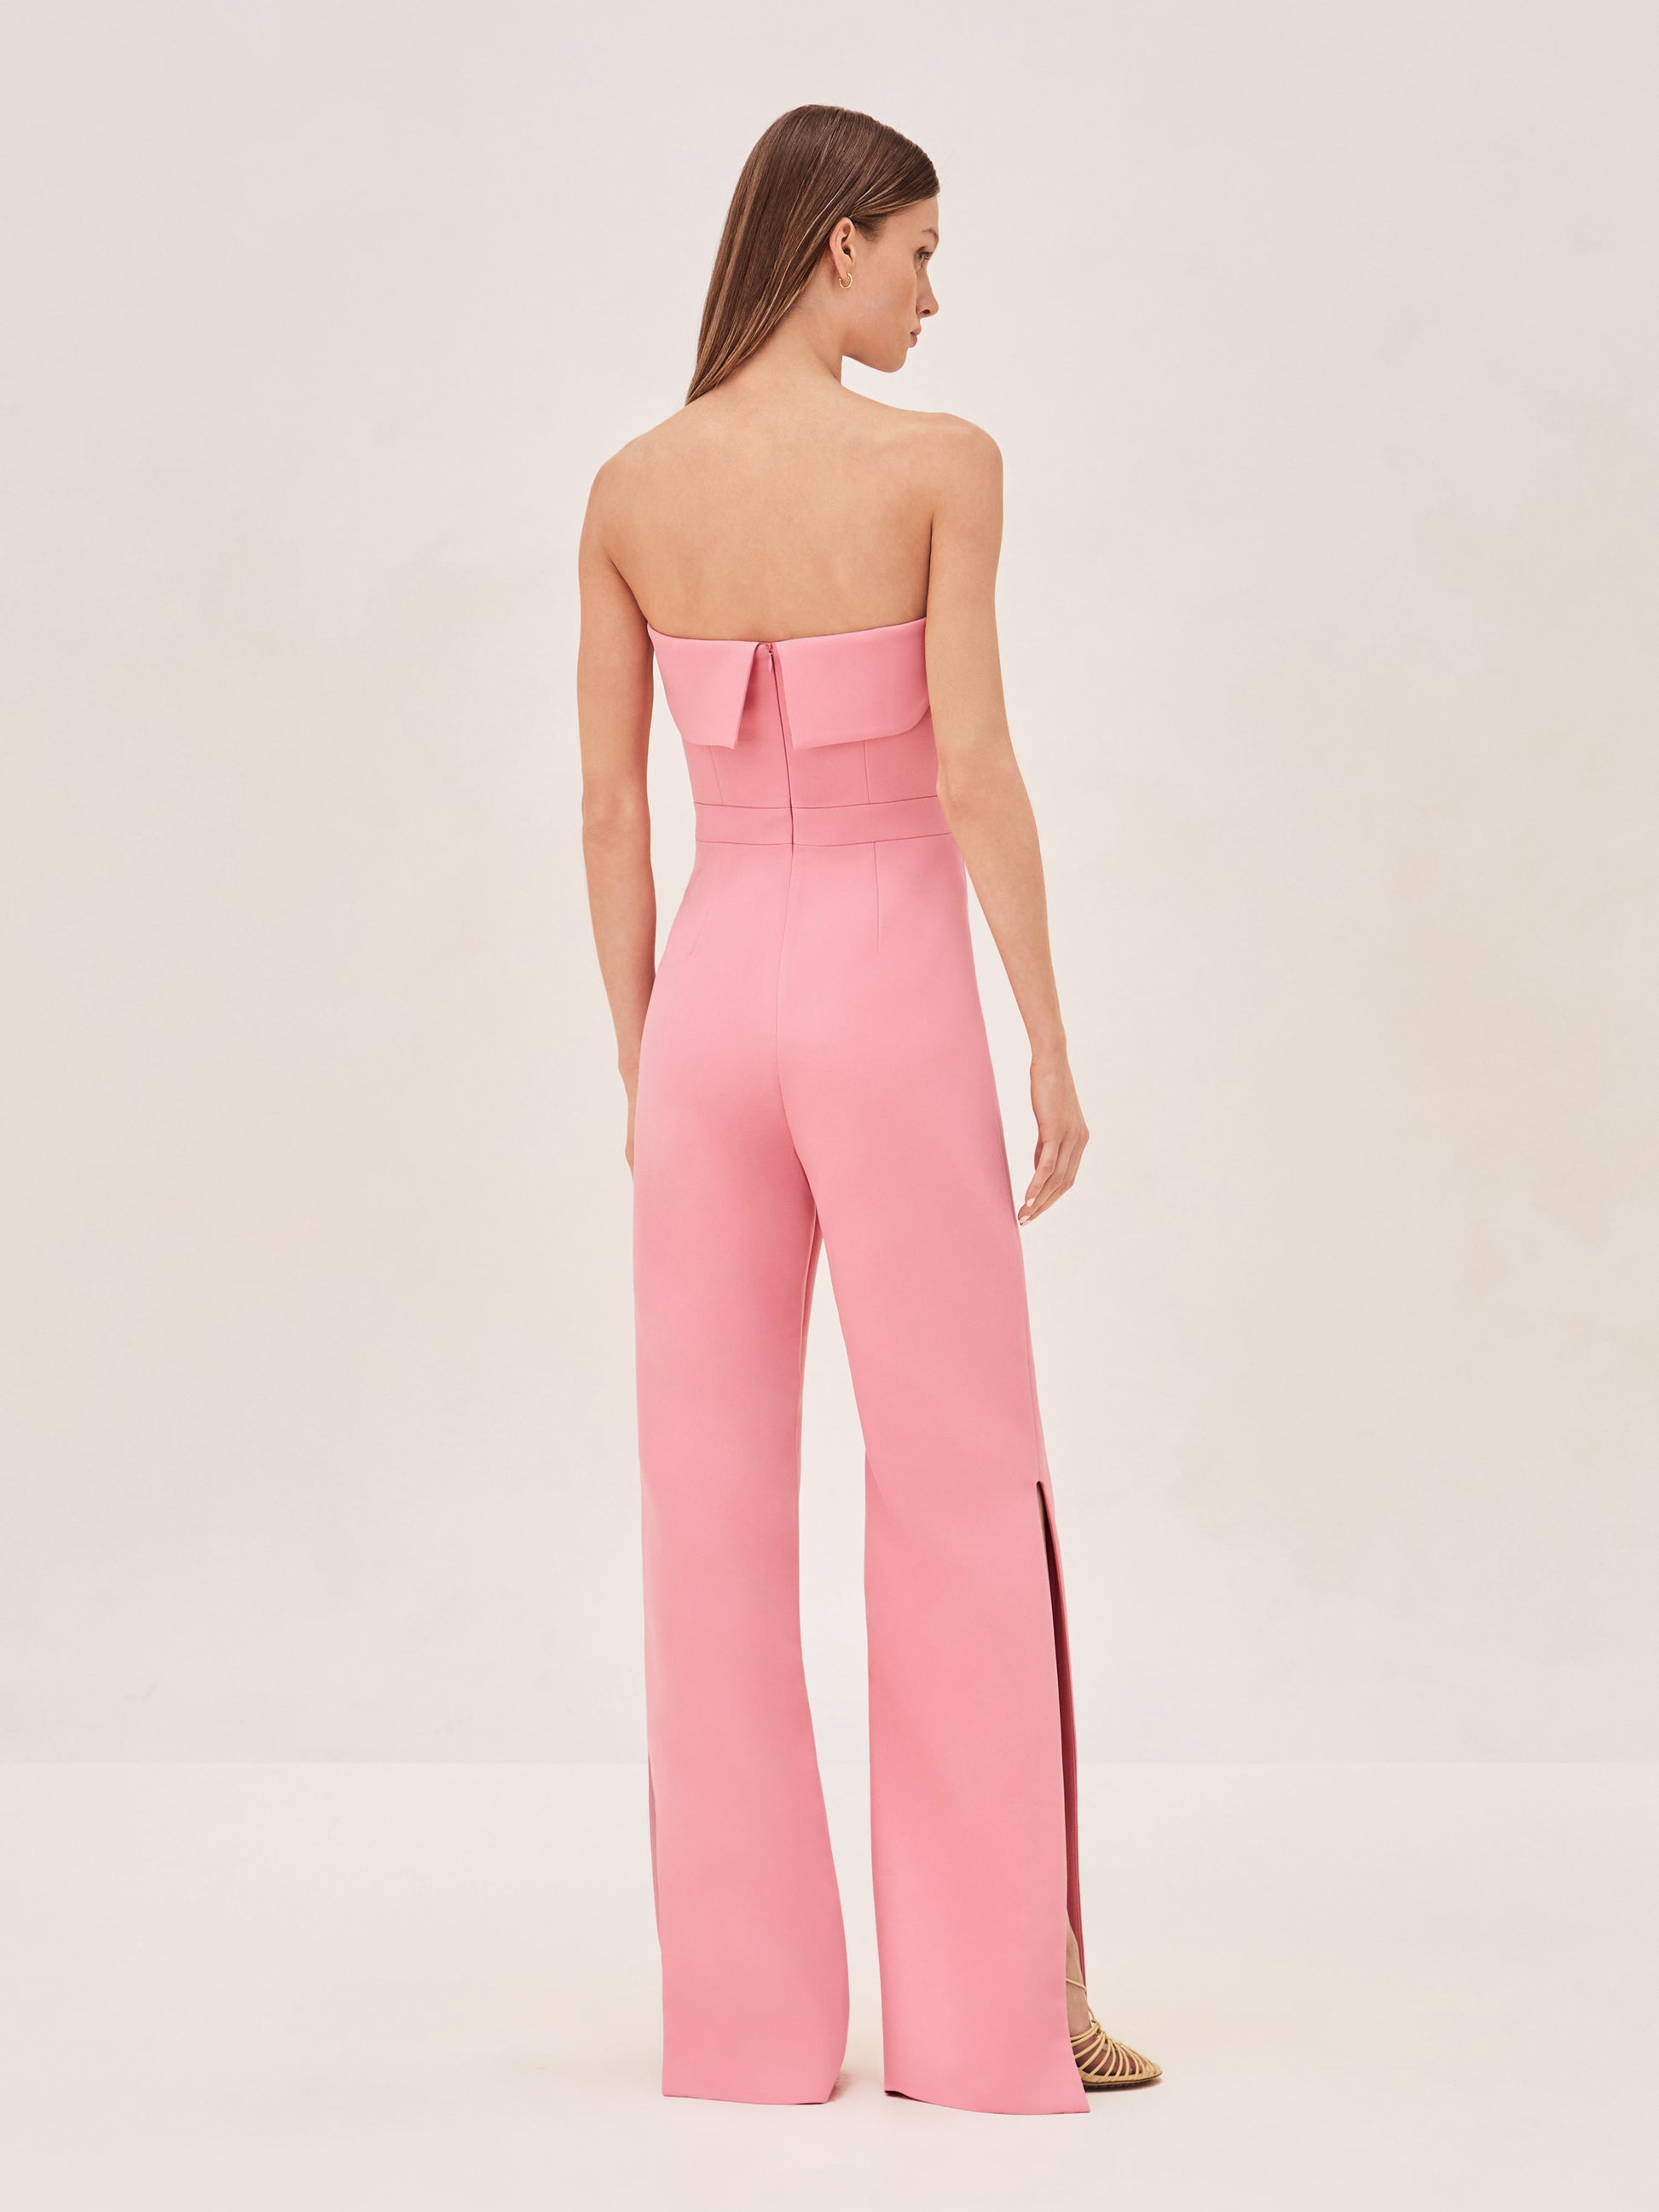 ALEXIS Strapless kaye jumpsuit in pink with slit on leg back image